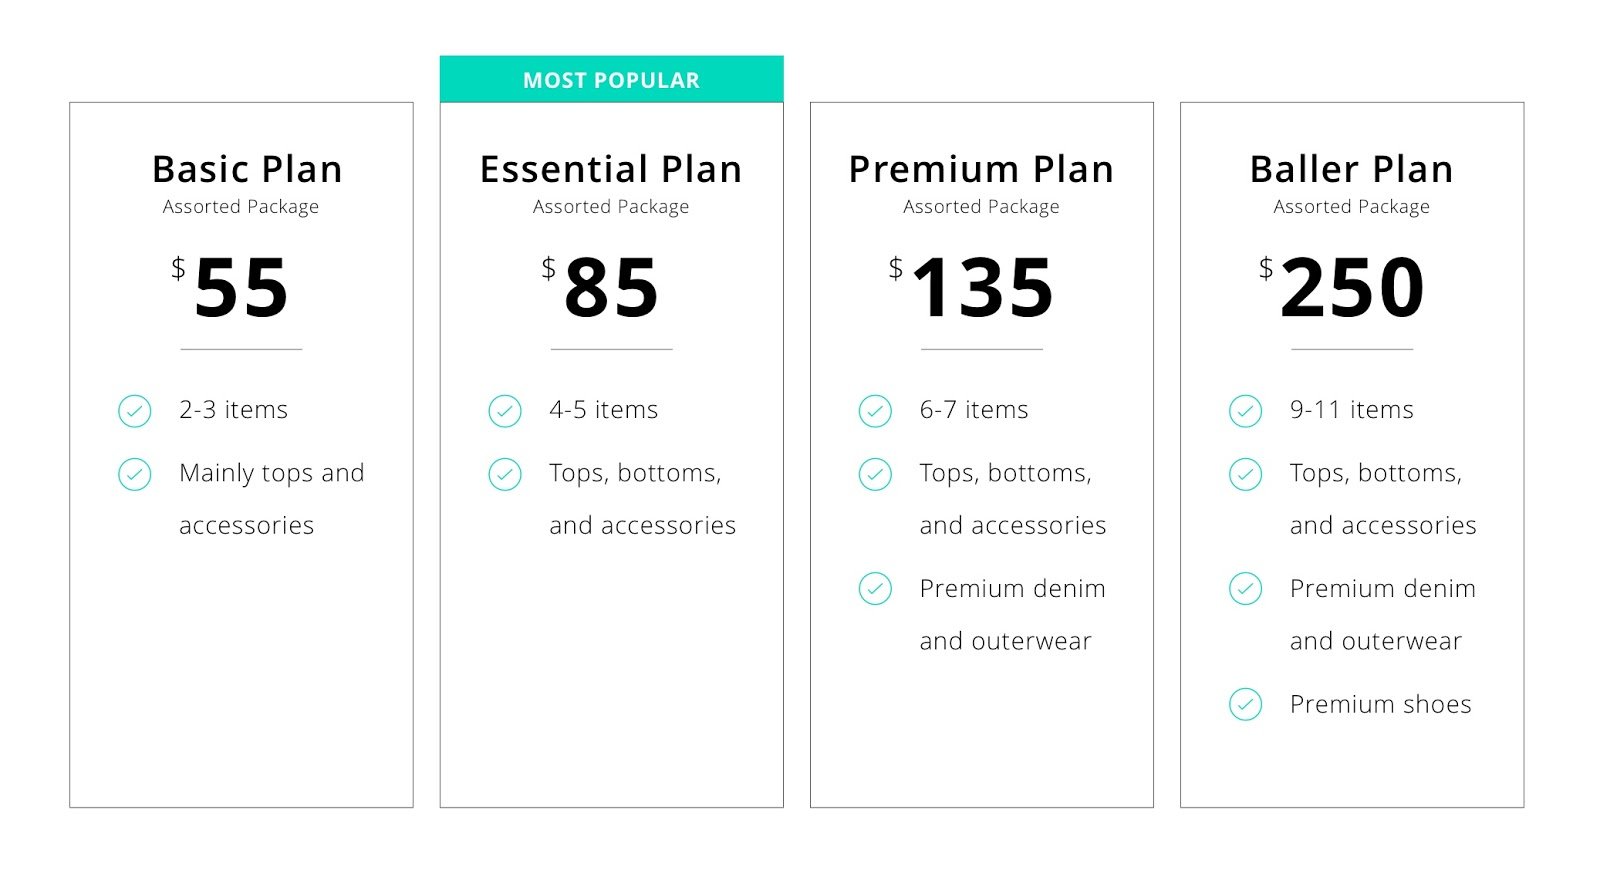 List out all the available options for each plan.